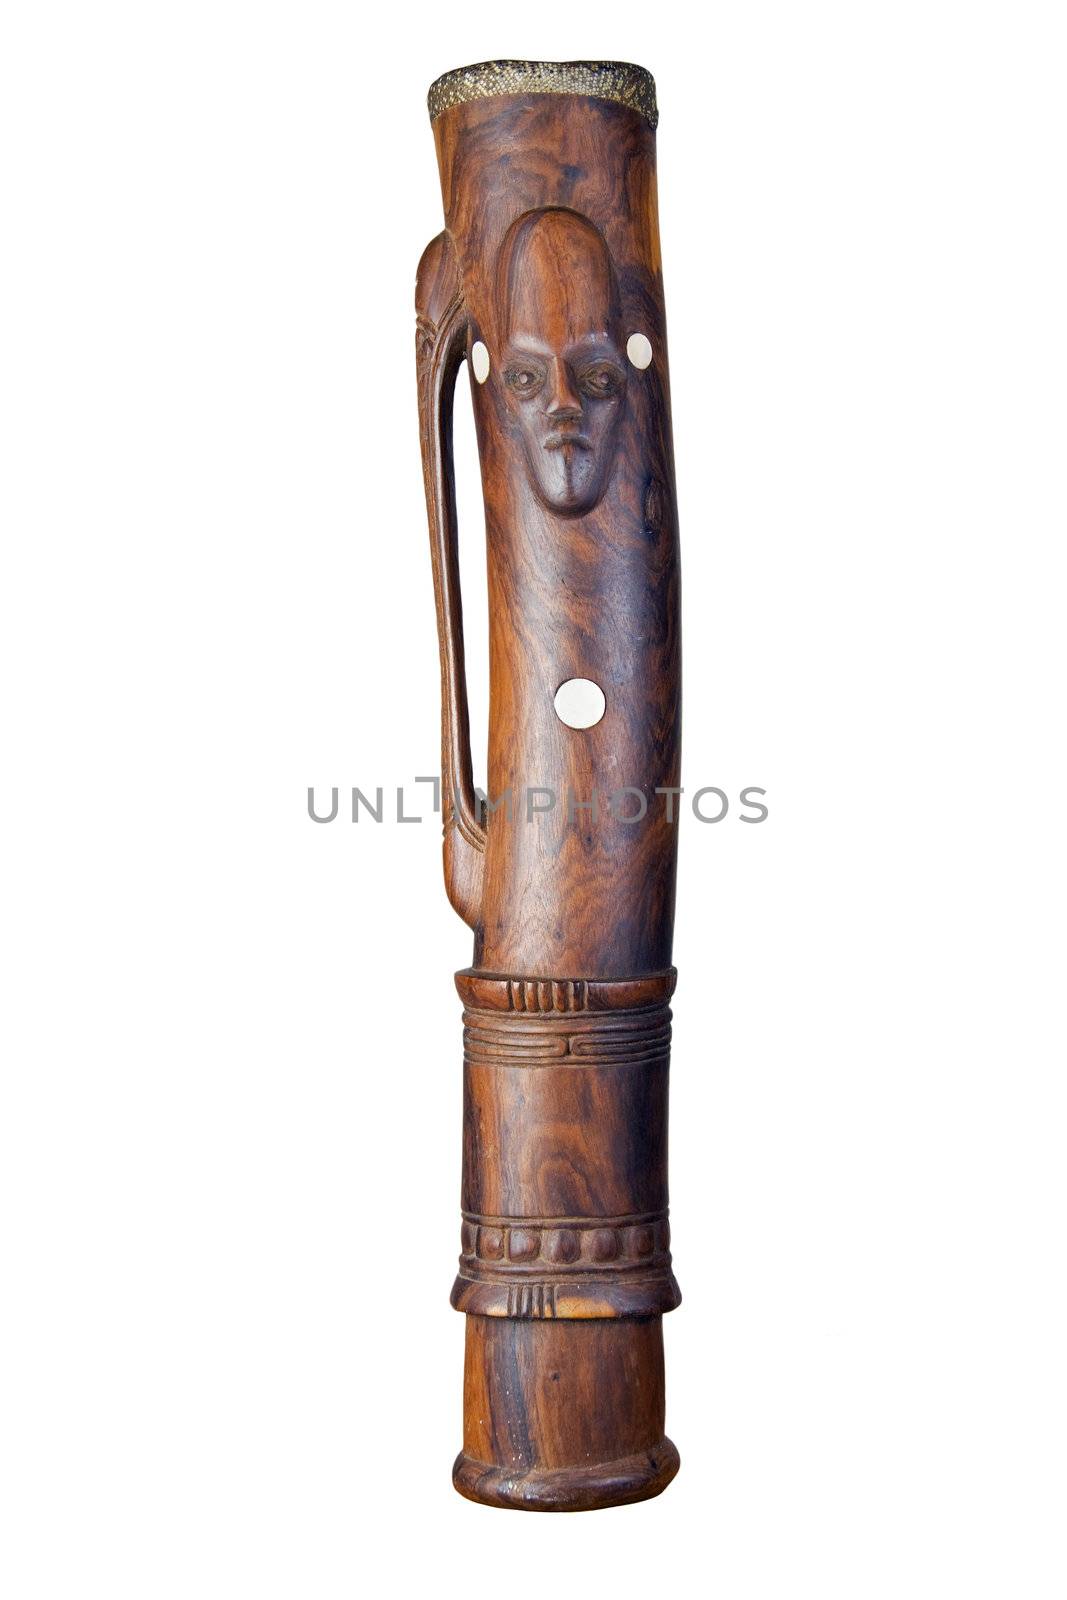 A beautiful hand made hand drum from Papua New Guina. Isolated over white with clipping path